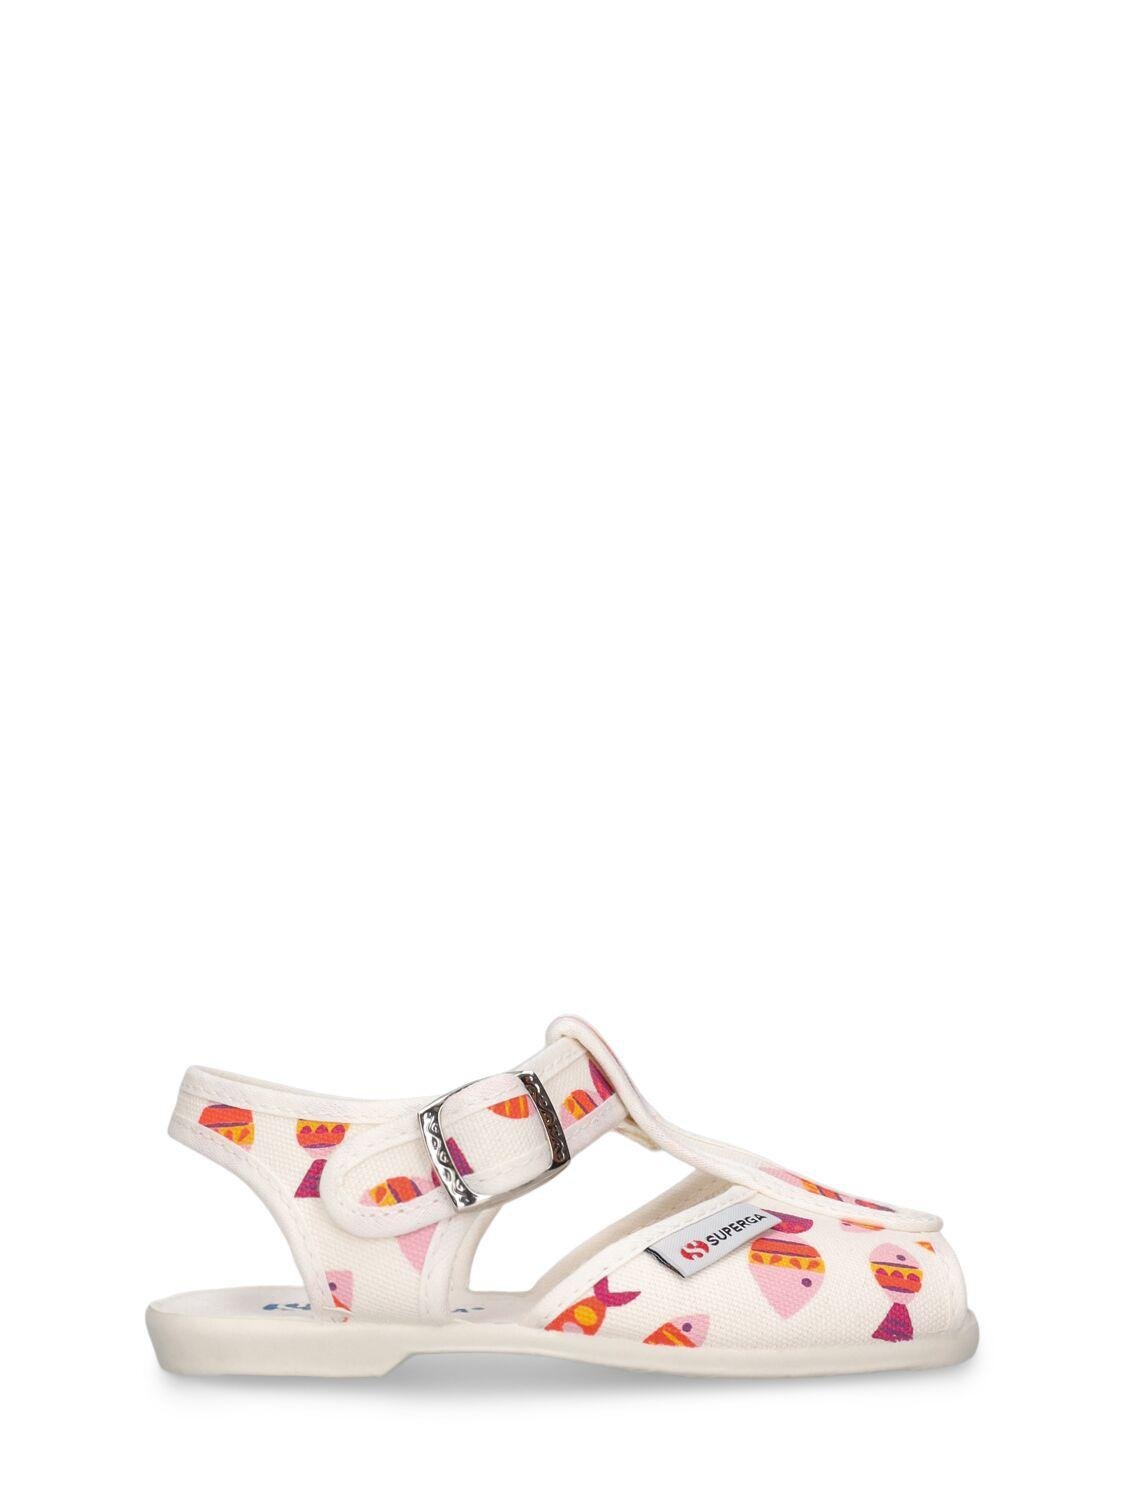 1200- Candy Fish Canvas Sandals by SUPERGA